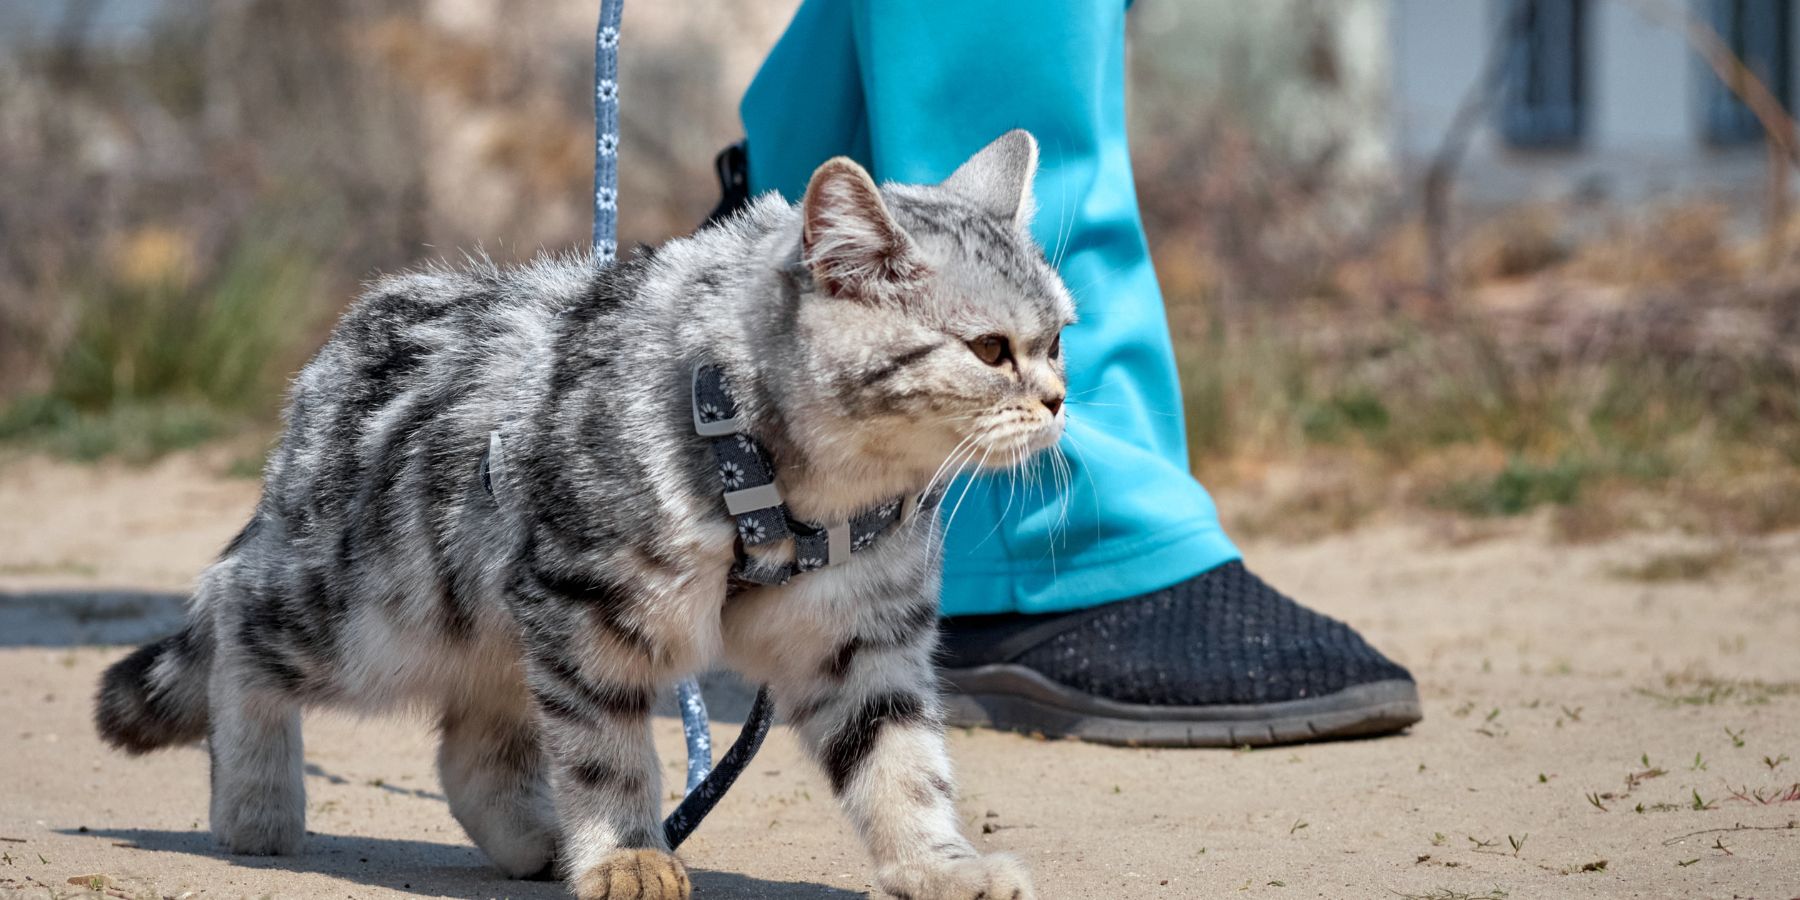 Cat Safety First: Outdoor Hazards to Watch for on Walks